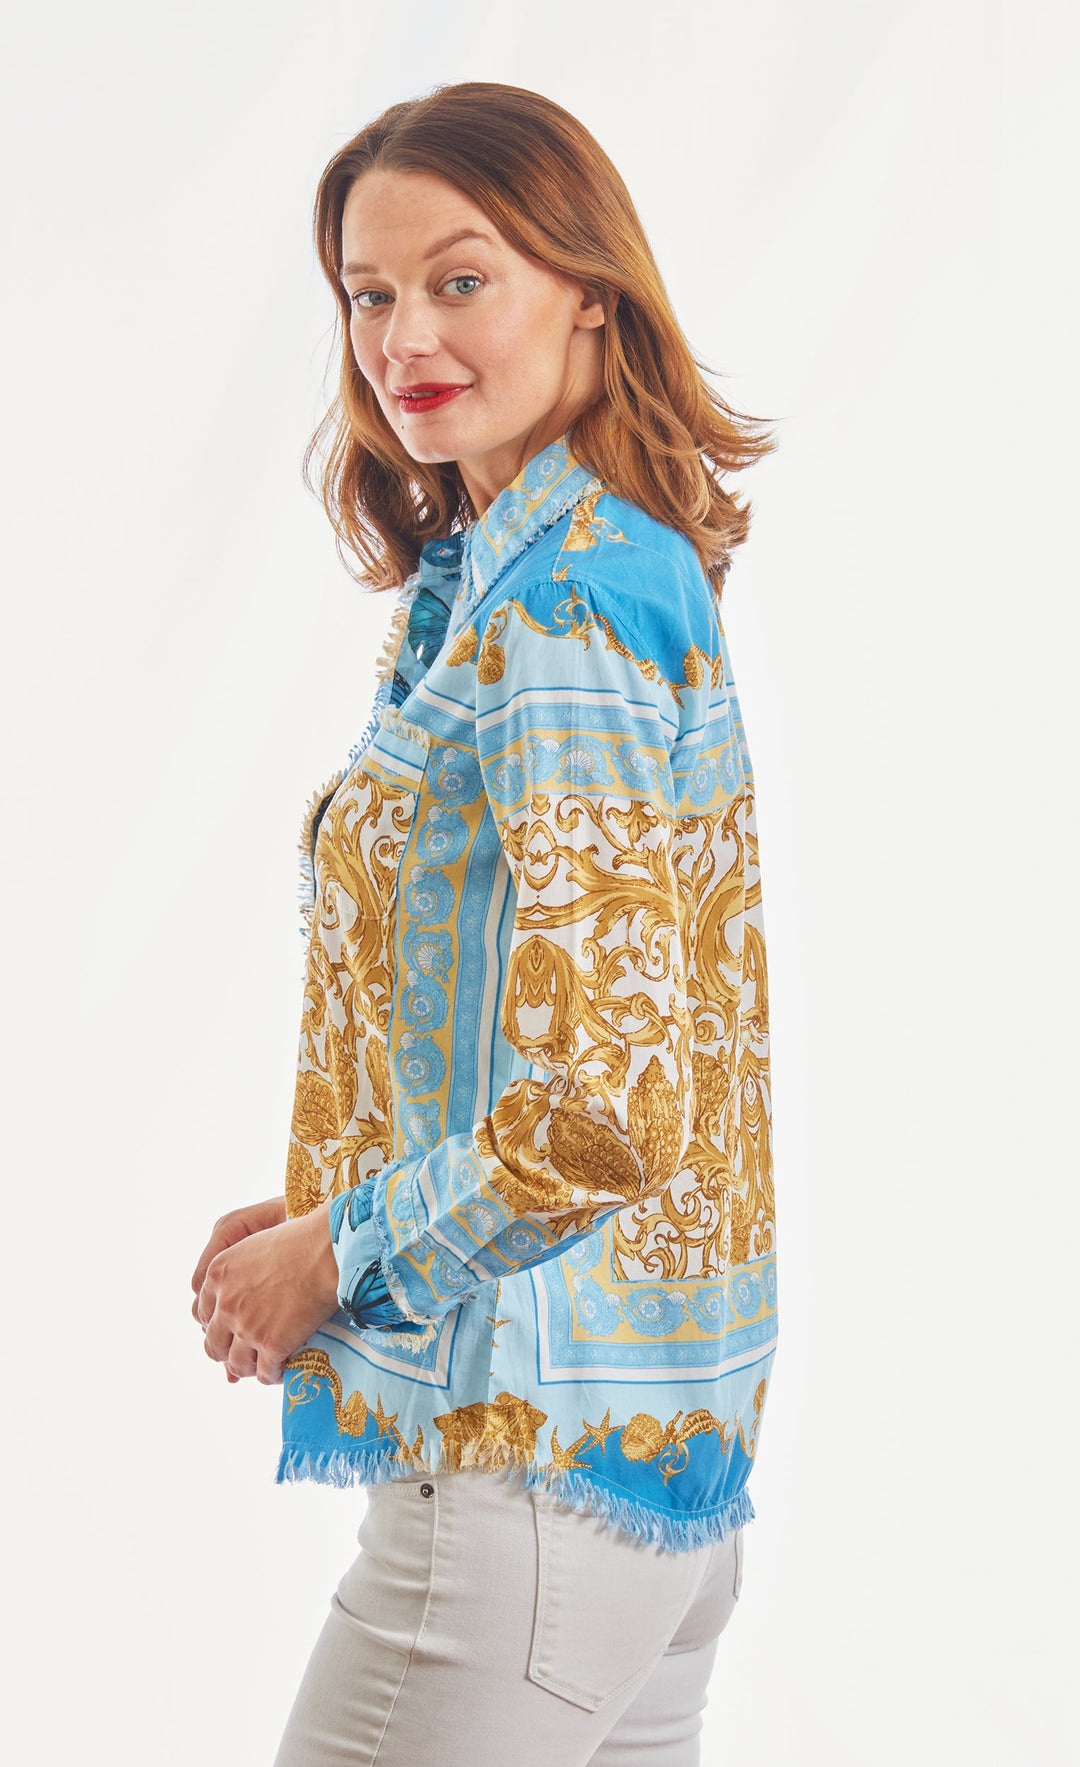 Cape Cod Bluee And Gold Scroll Print XS / 4949-S562